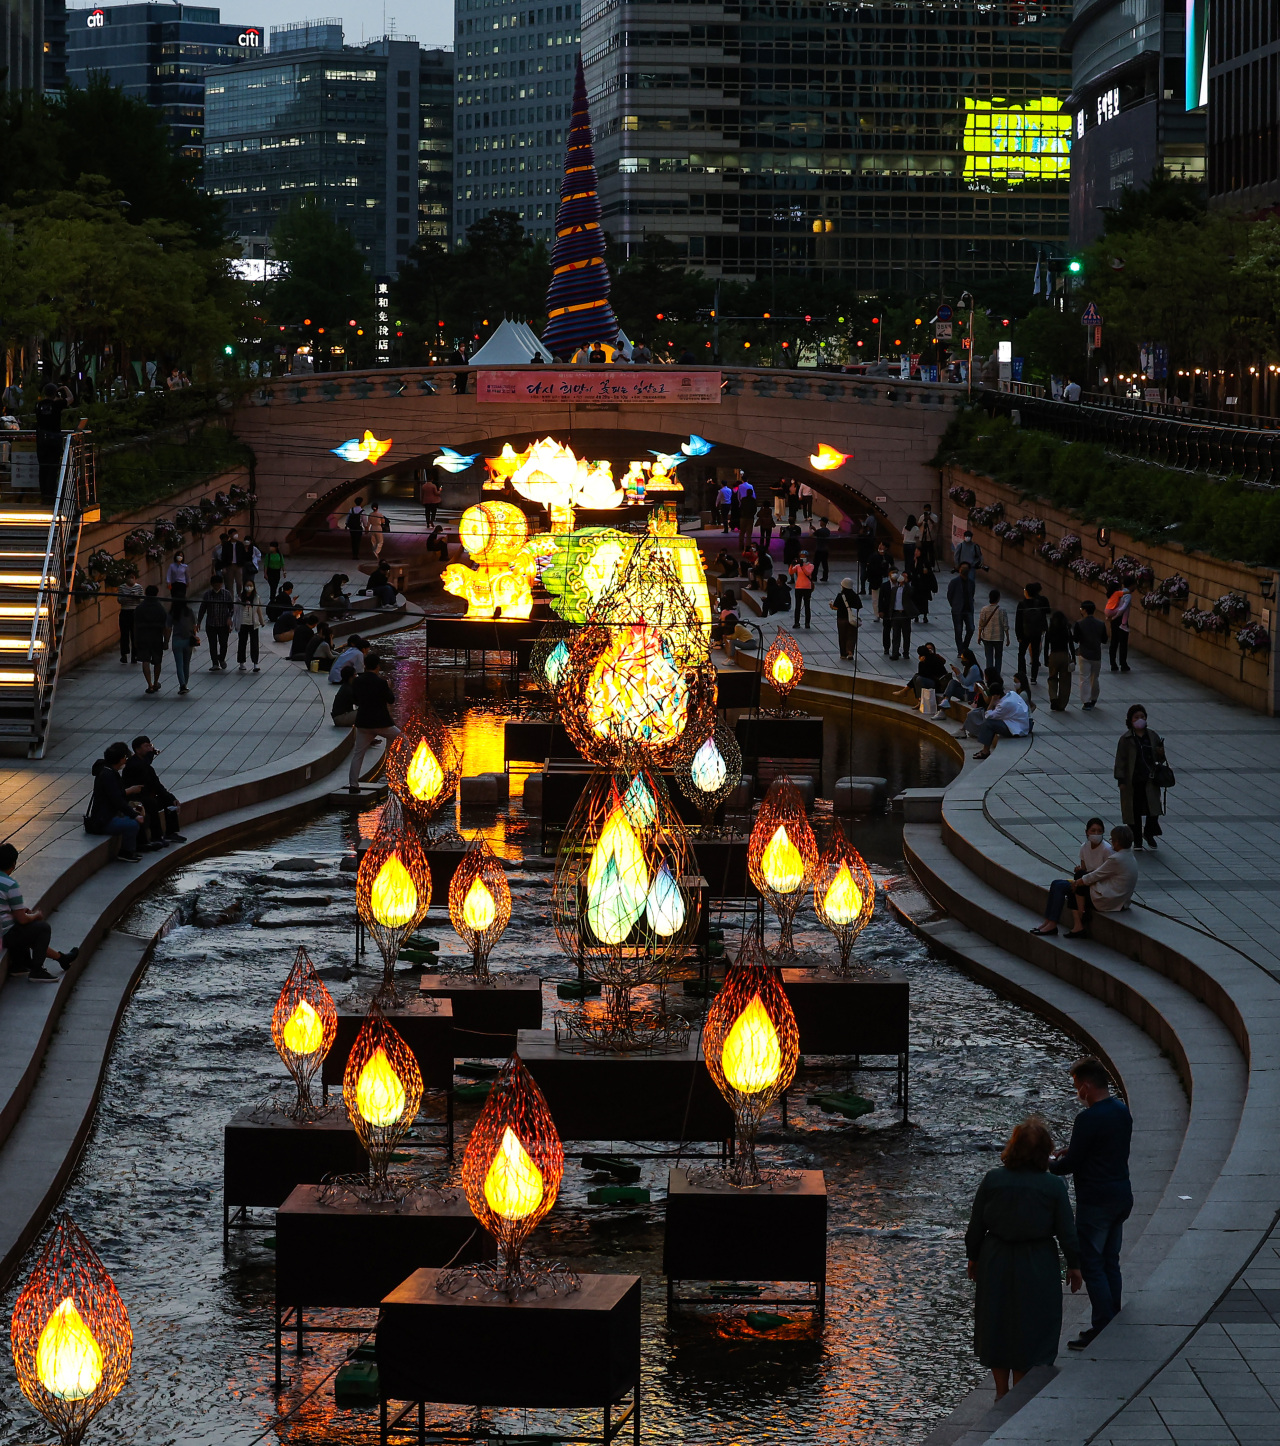 “Exhibition of Traditional Lanterns” at Cheonggye Stream, central Seoul, is seen on Tuesday evening. (Yonhap)